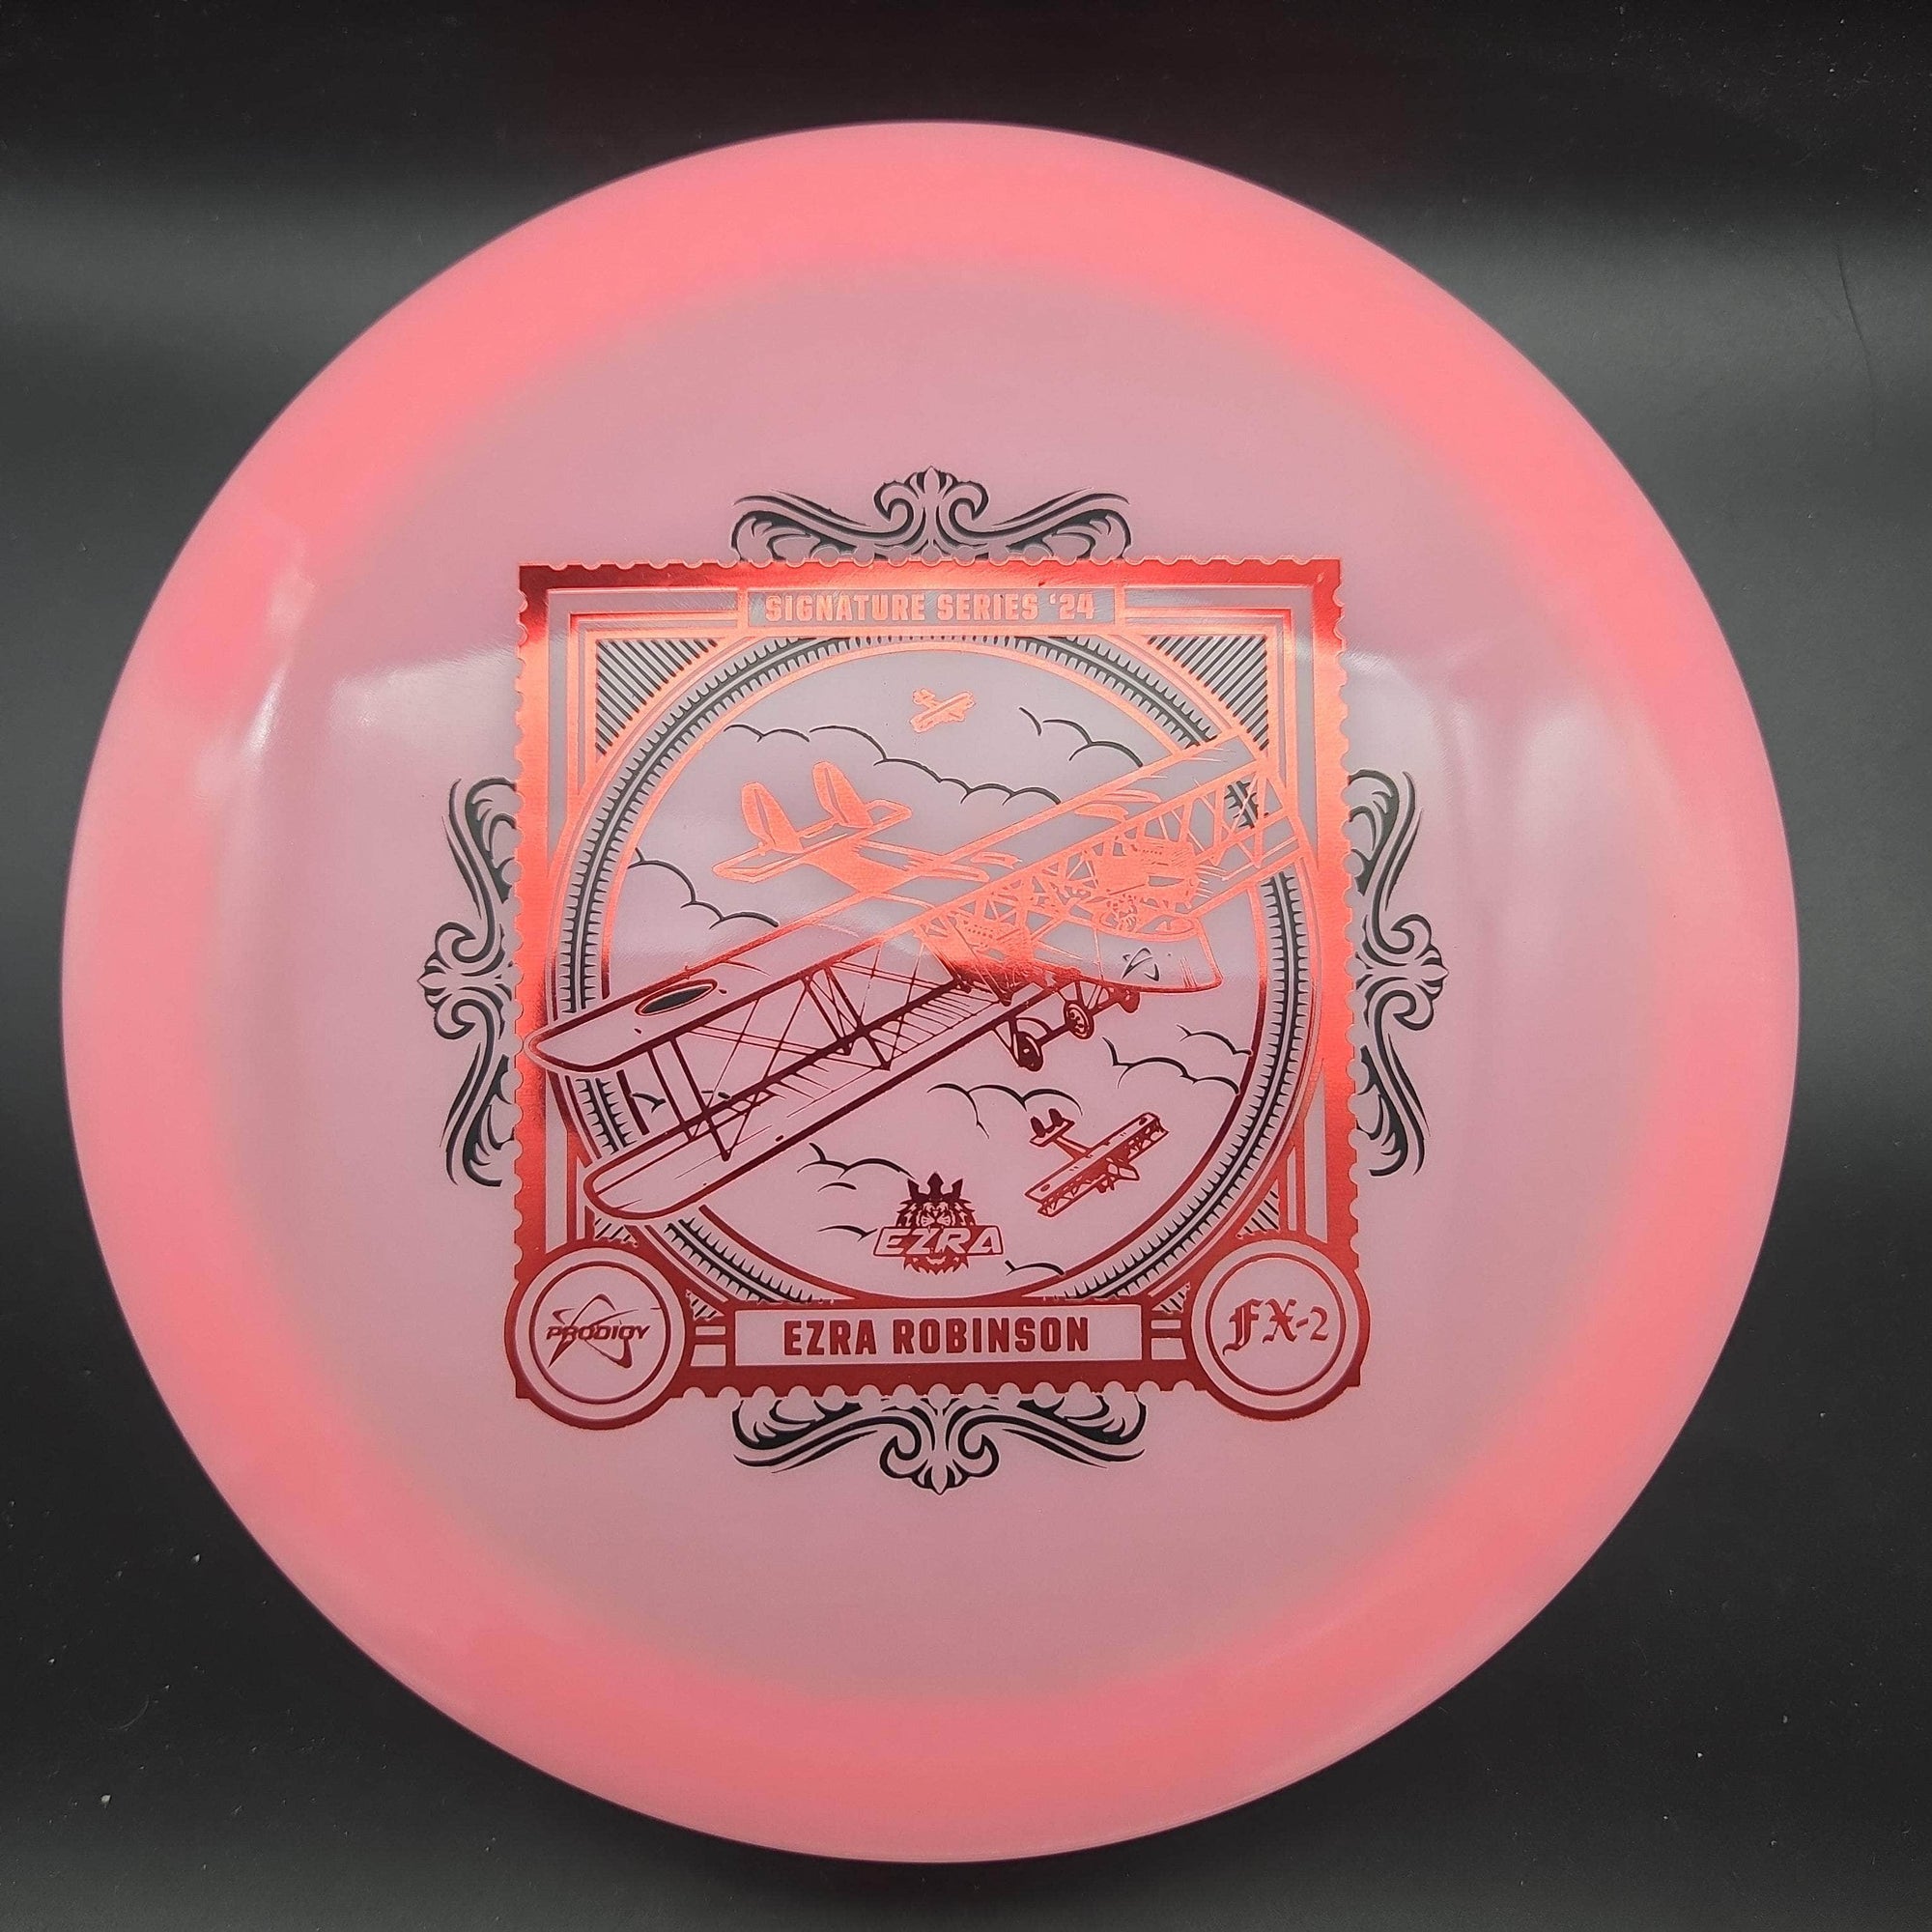 Prodigy Fairway Driver Pink Red Stamp 171g FX2, 400 Color Glow, Ezra Robinson 2024 Signature Series